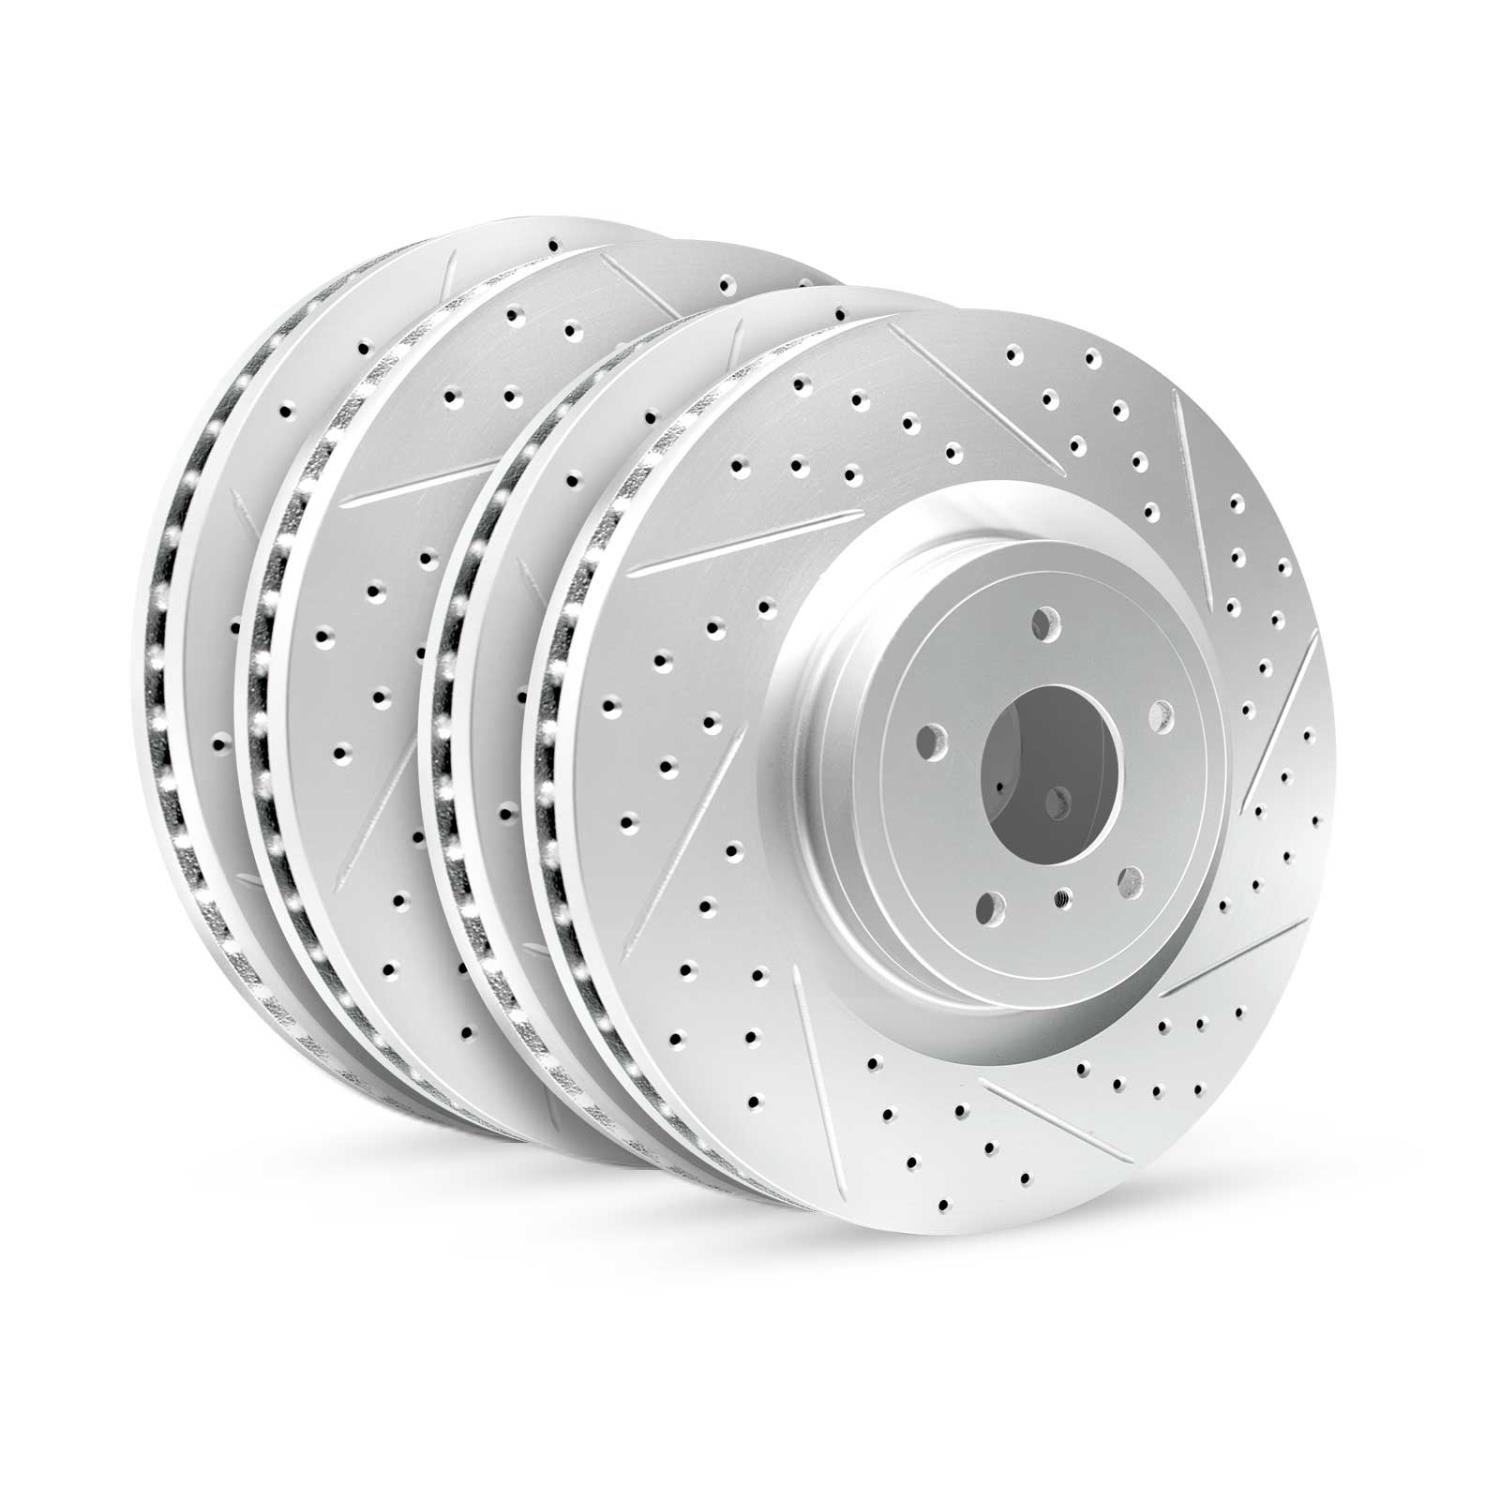 GEO-Carbon Drilled/Slotted Rotors, 2018-2020 Kia/Hyundai/Genesis, Position: Front/Rear